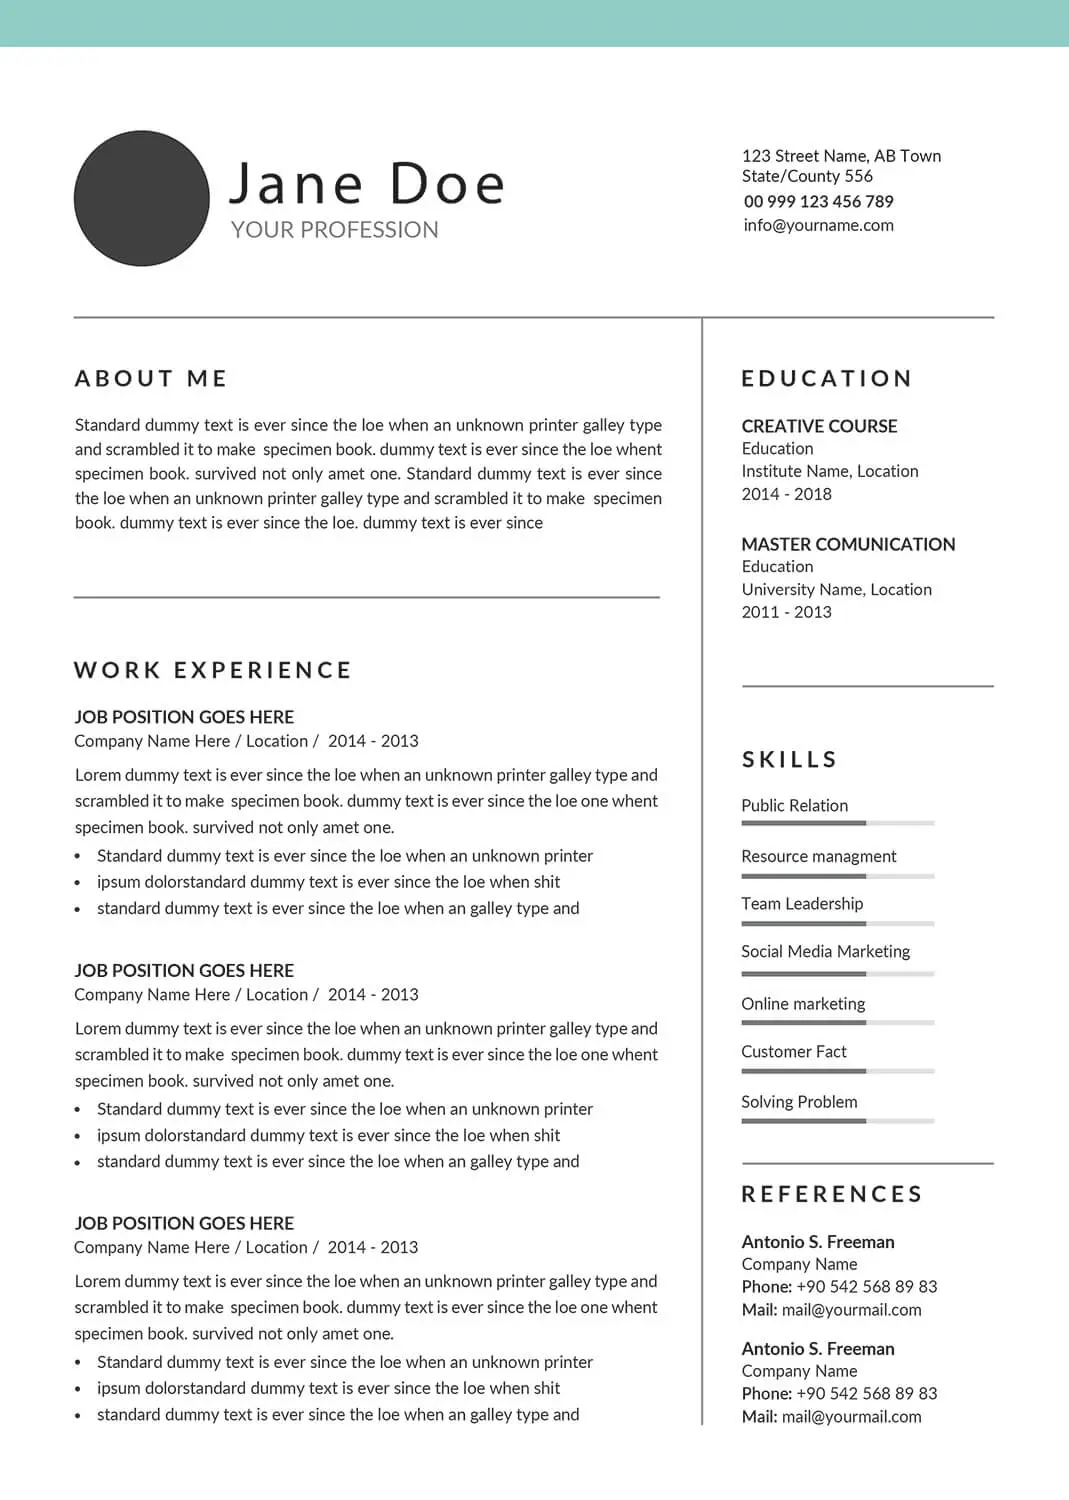 Best resume format for accounting
and finance professionals